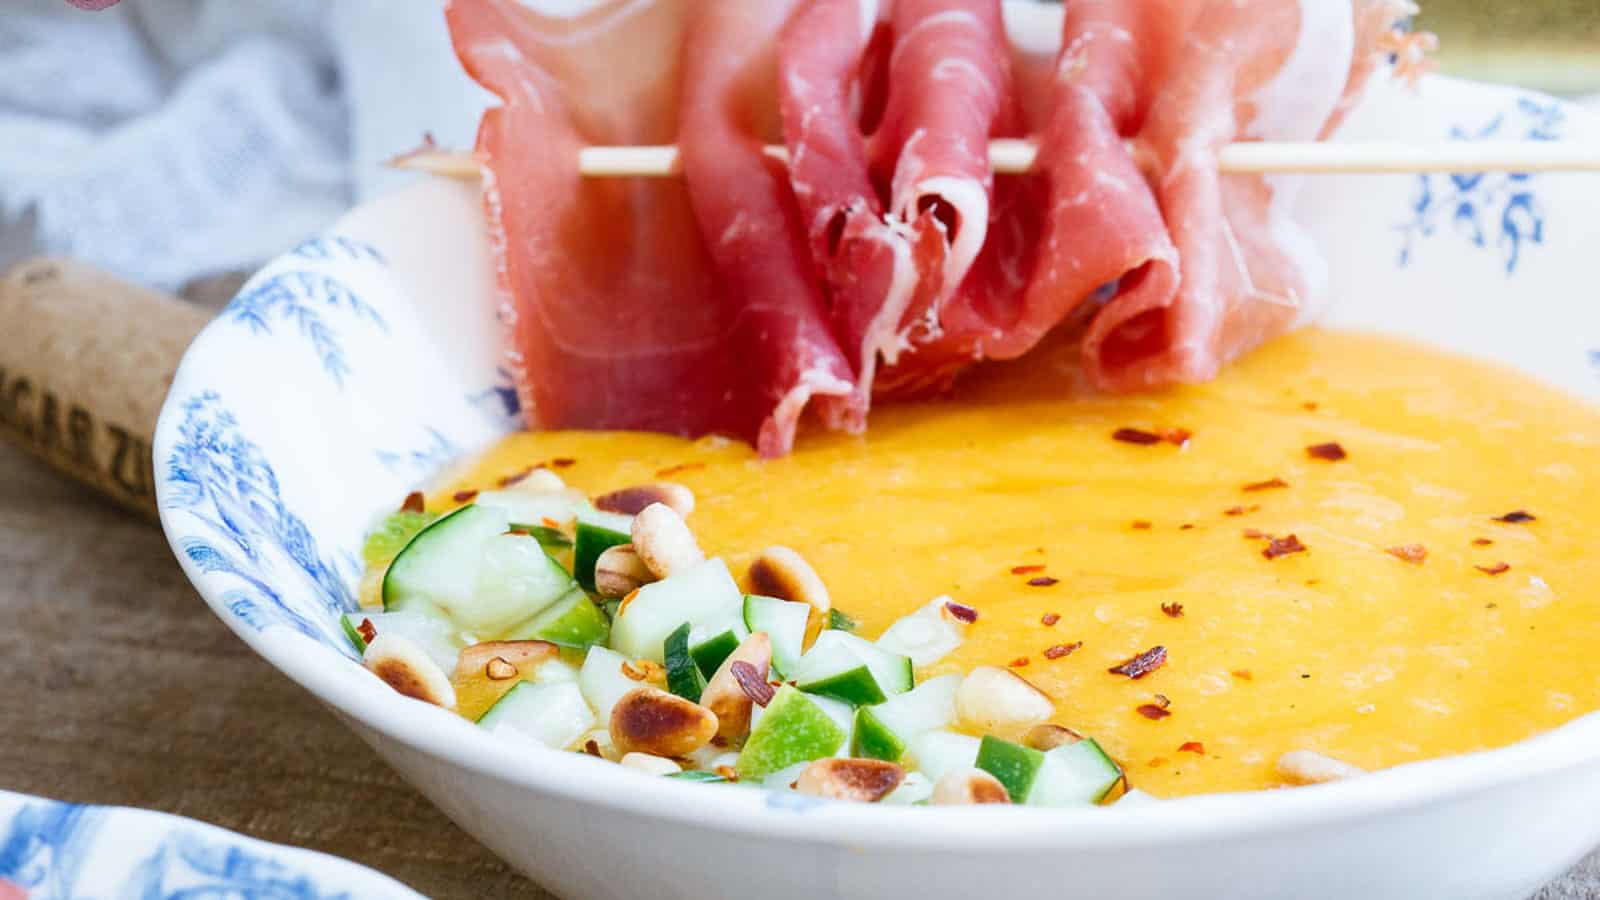 Mango melon soup with pickled cucumber and prosciutto skewer in a bowl.